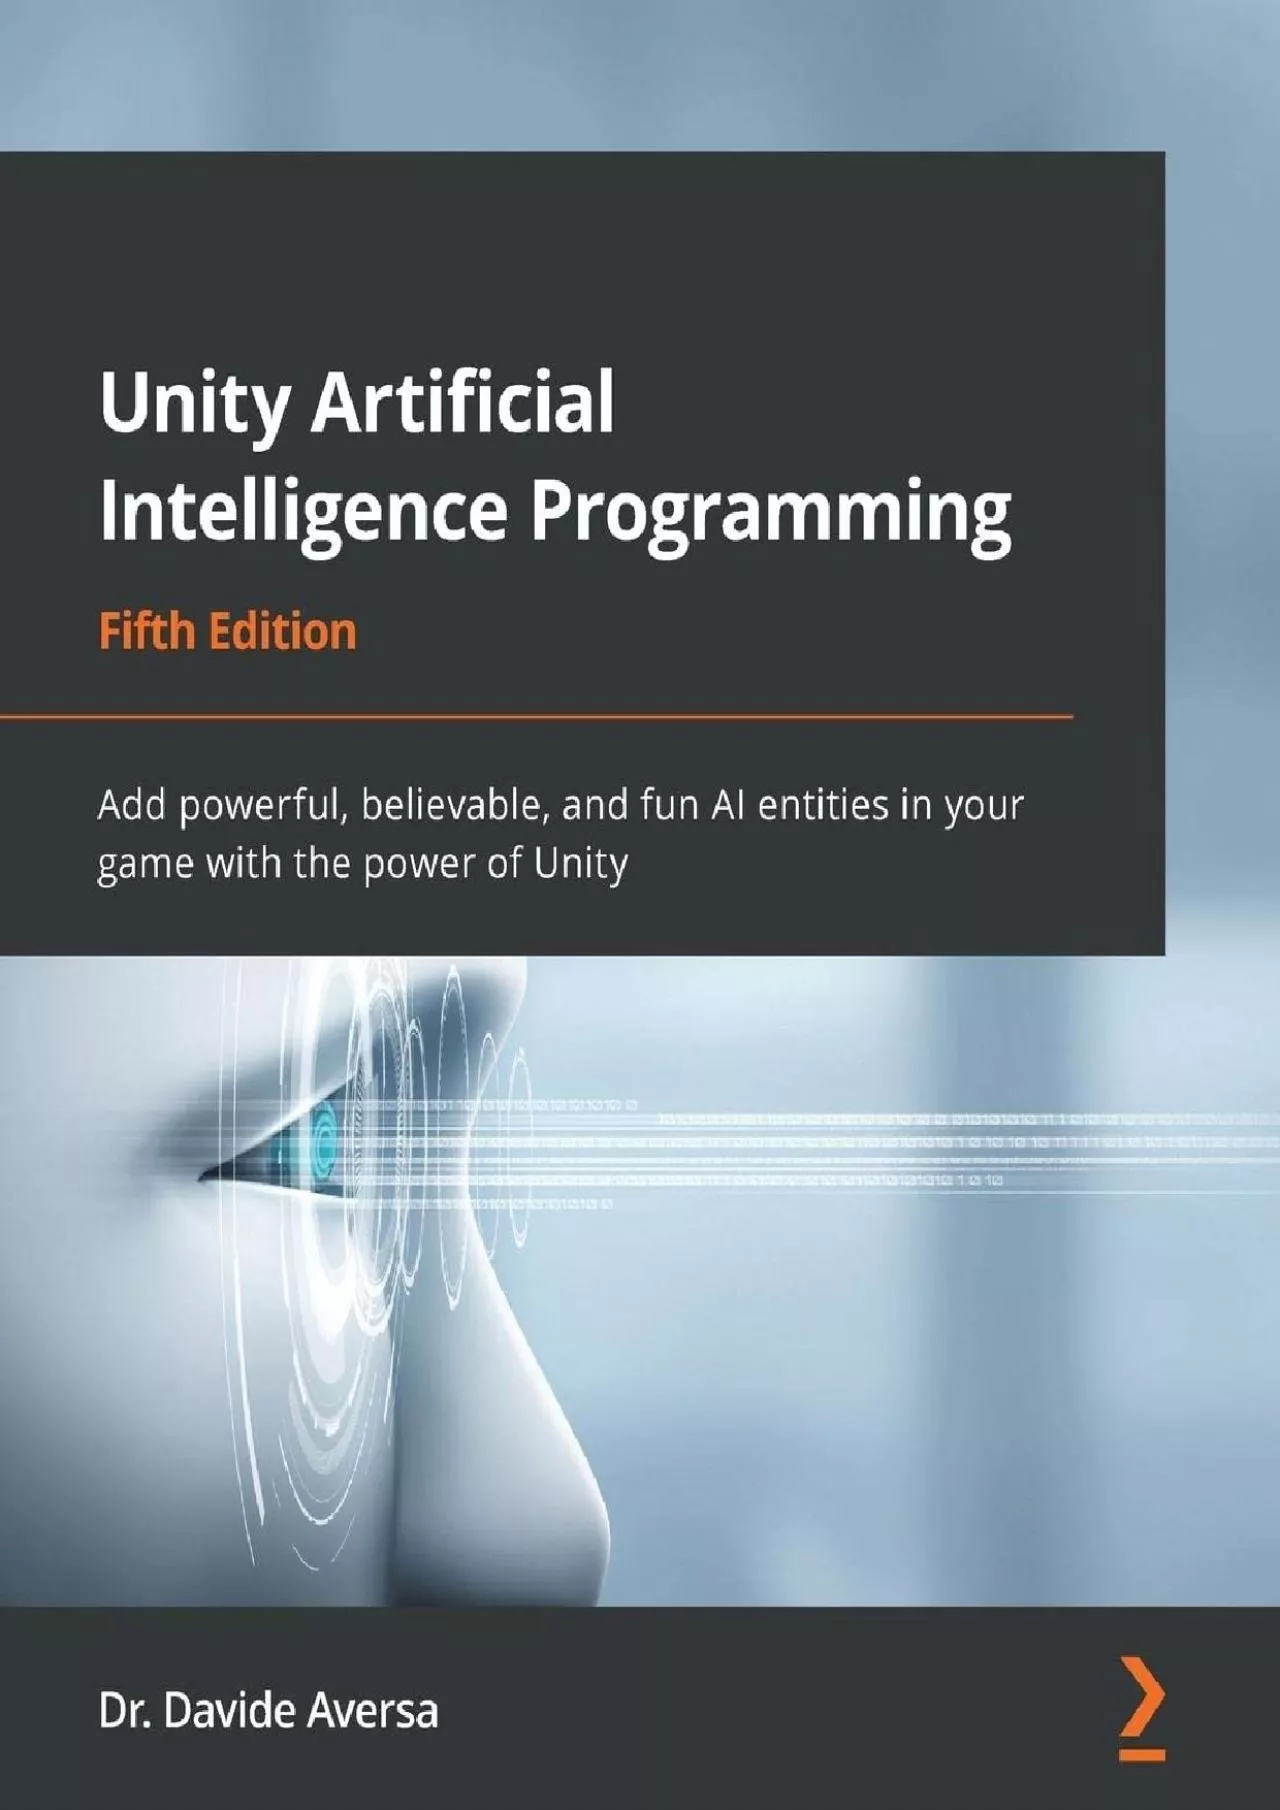 [READING BOOK]-Unity Artificial Intelligence Programming: Add powerful, believable, and